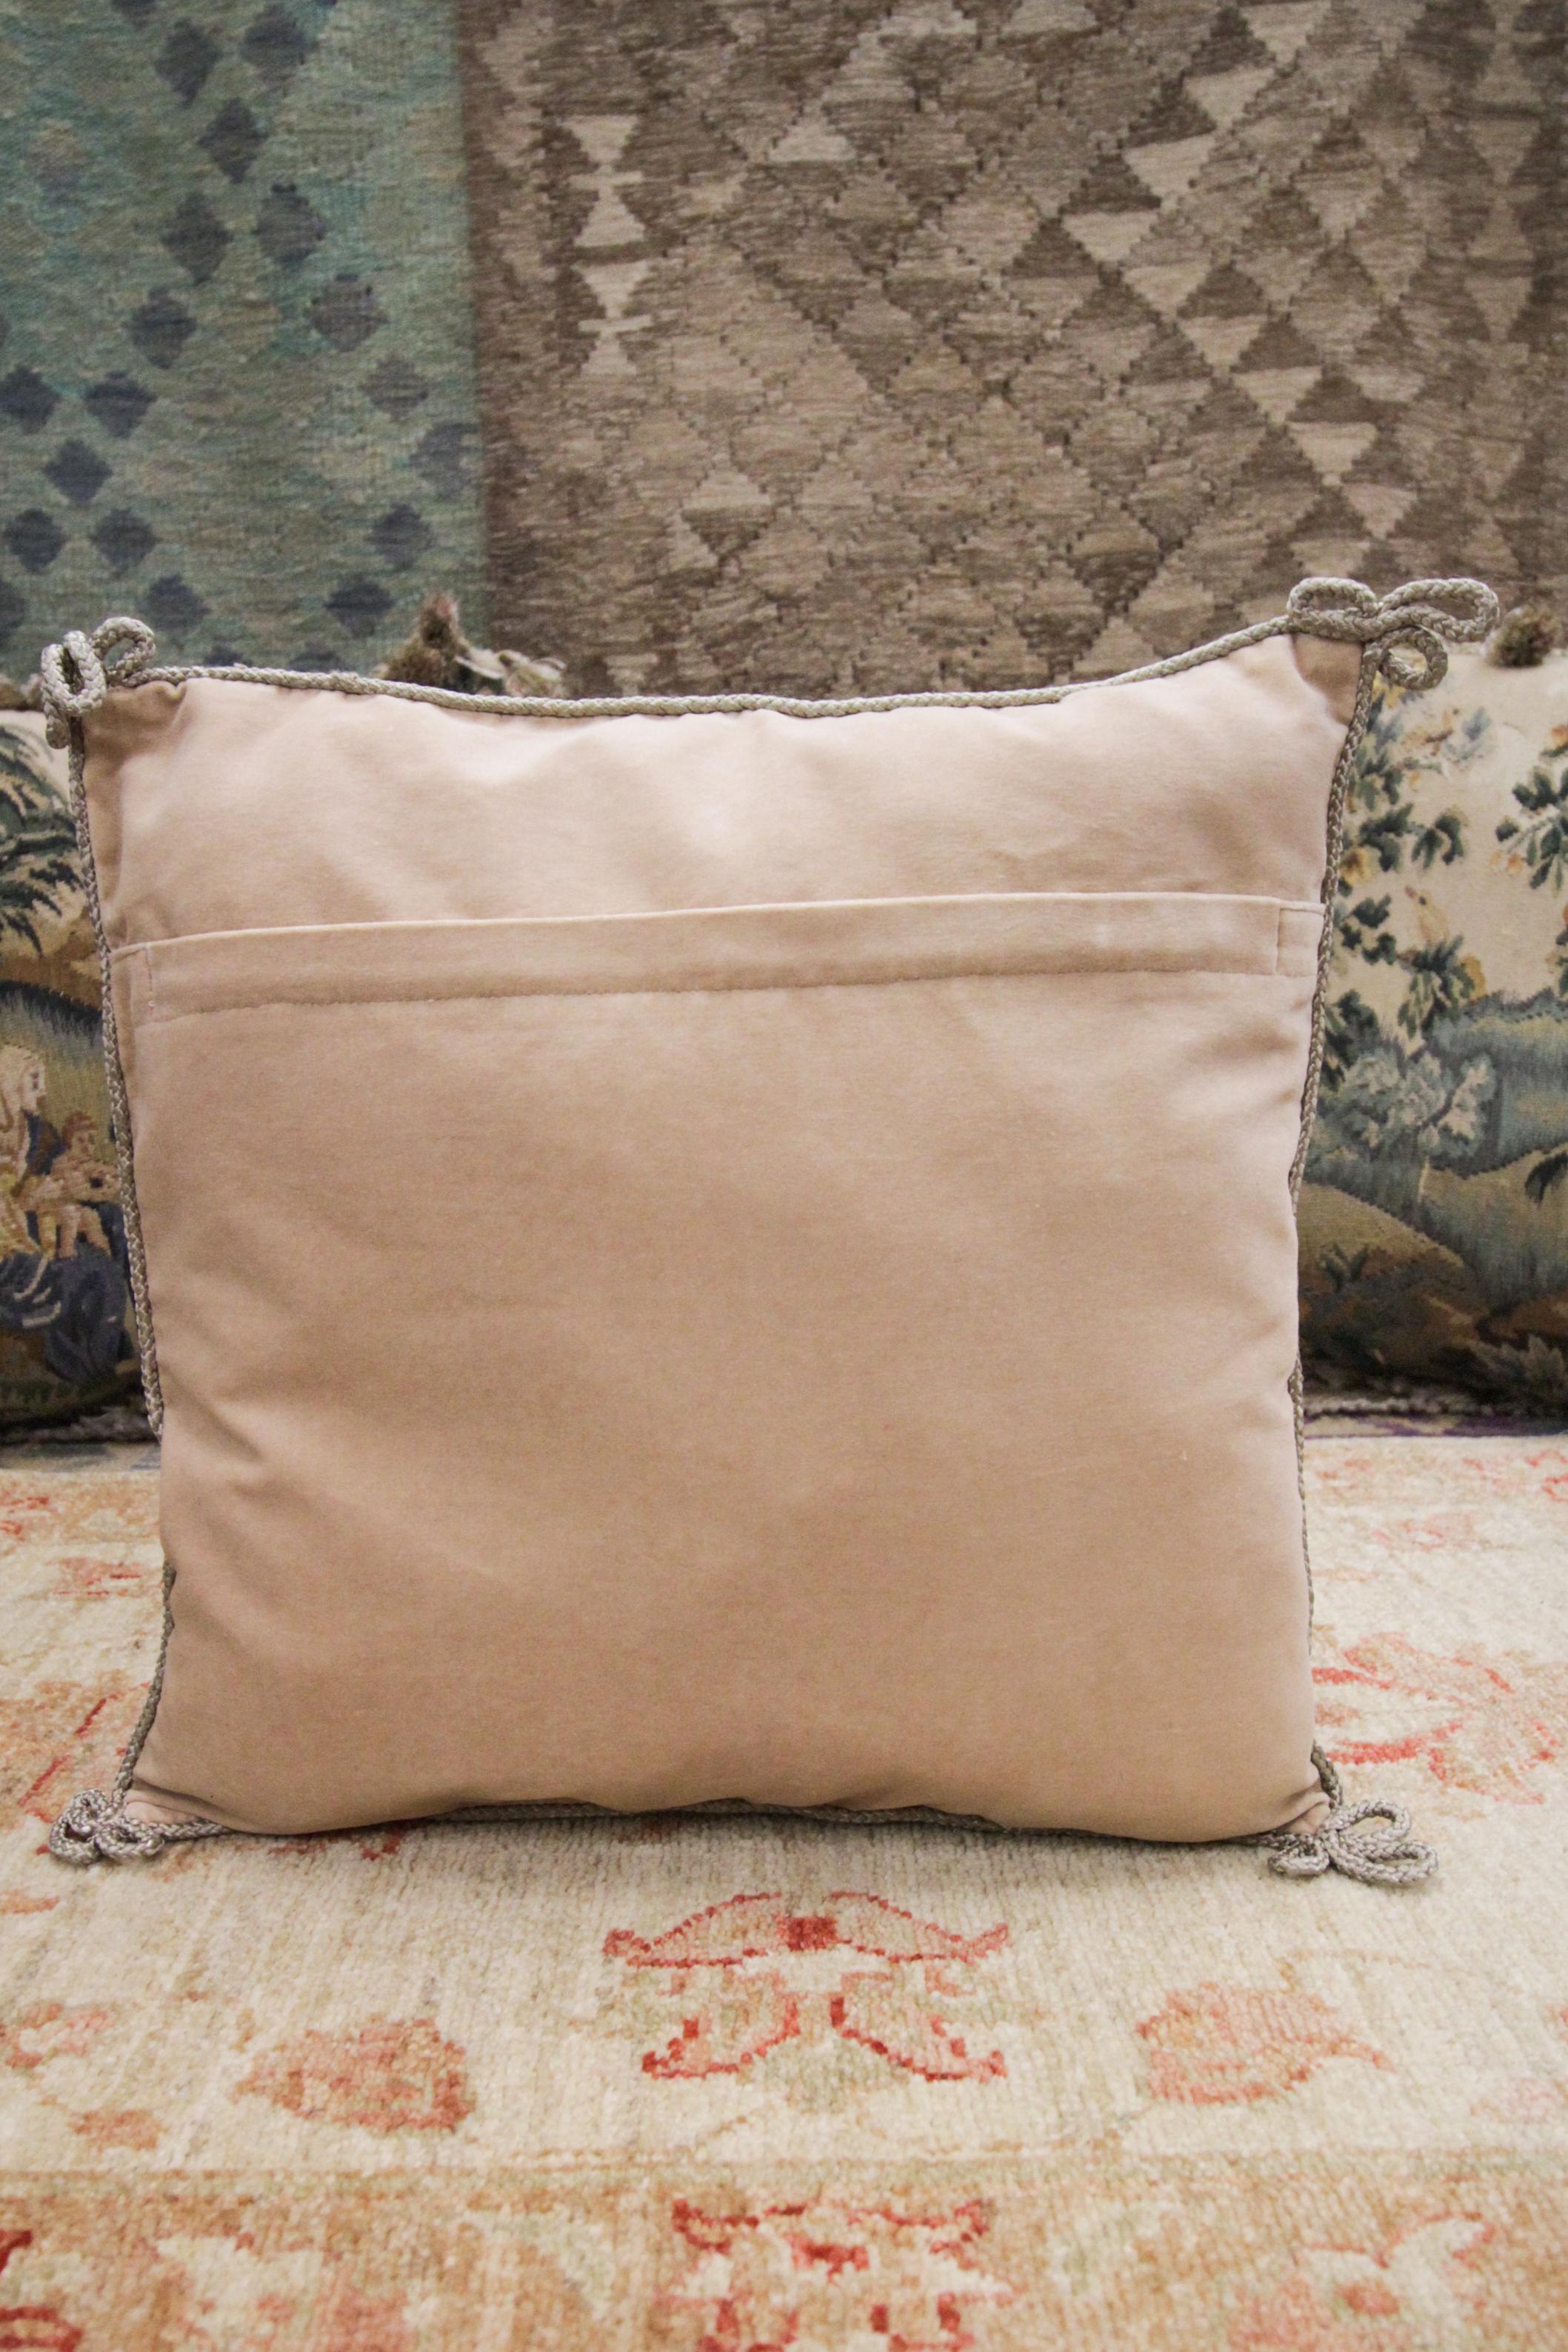 Late 20th Century Floral Handmade Cushion Cover, Needlepoint Cream Purple Wool Scatter Cushion